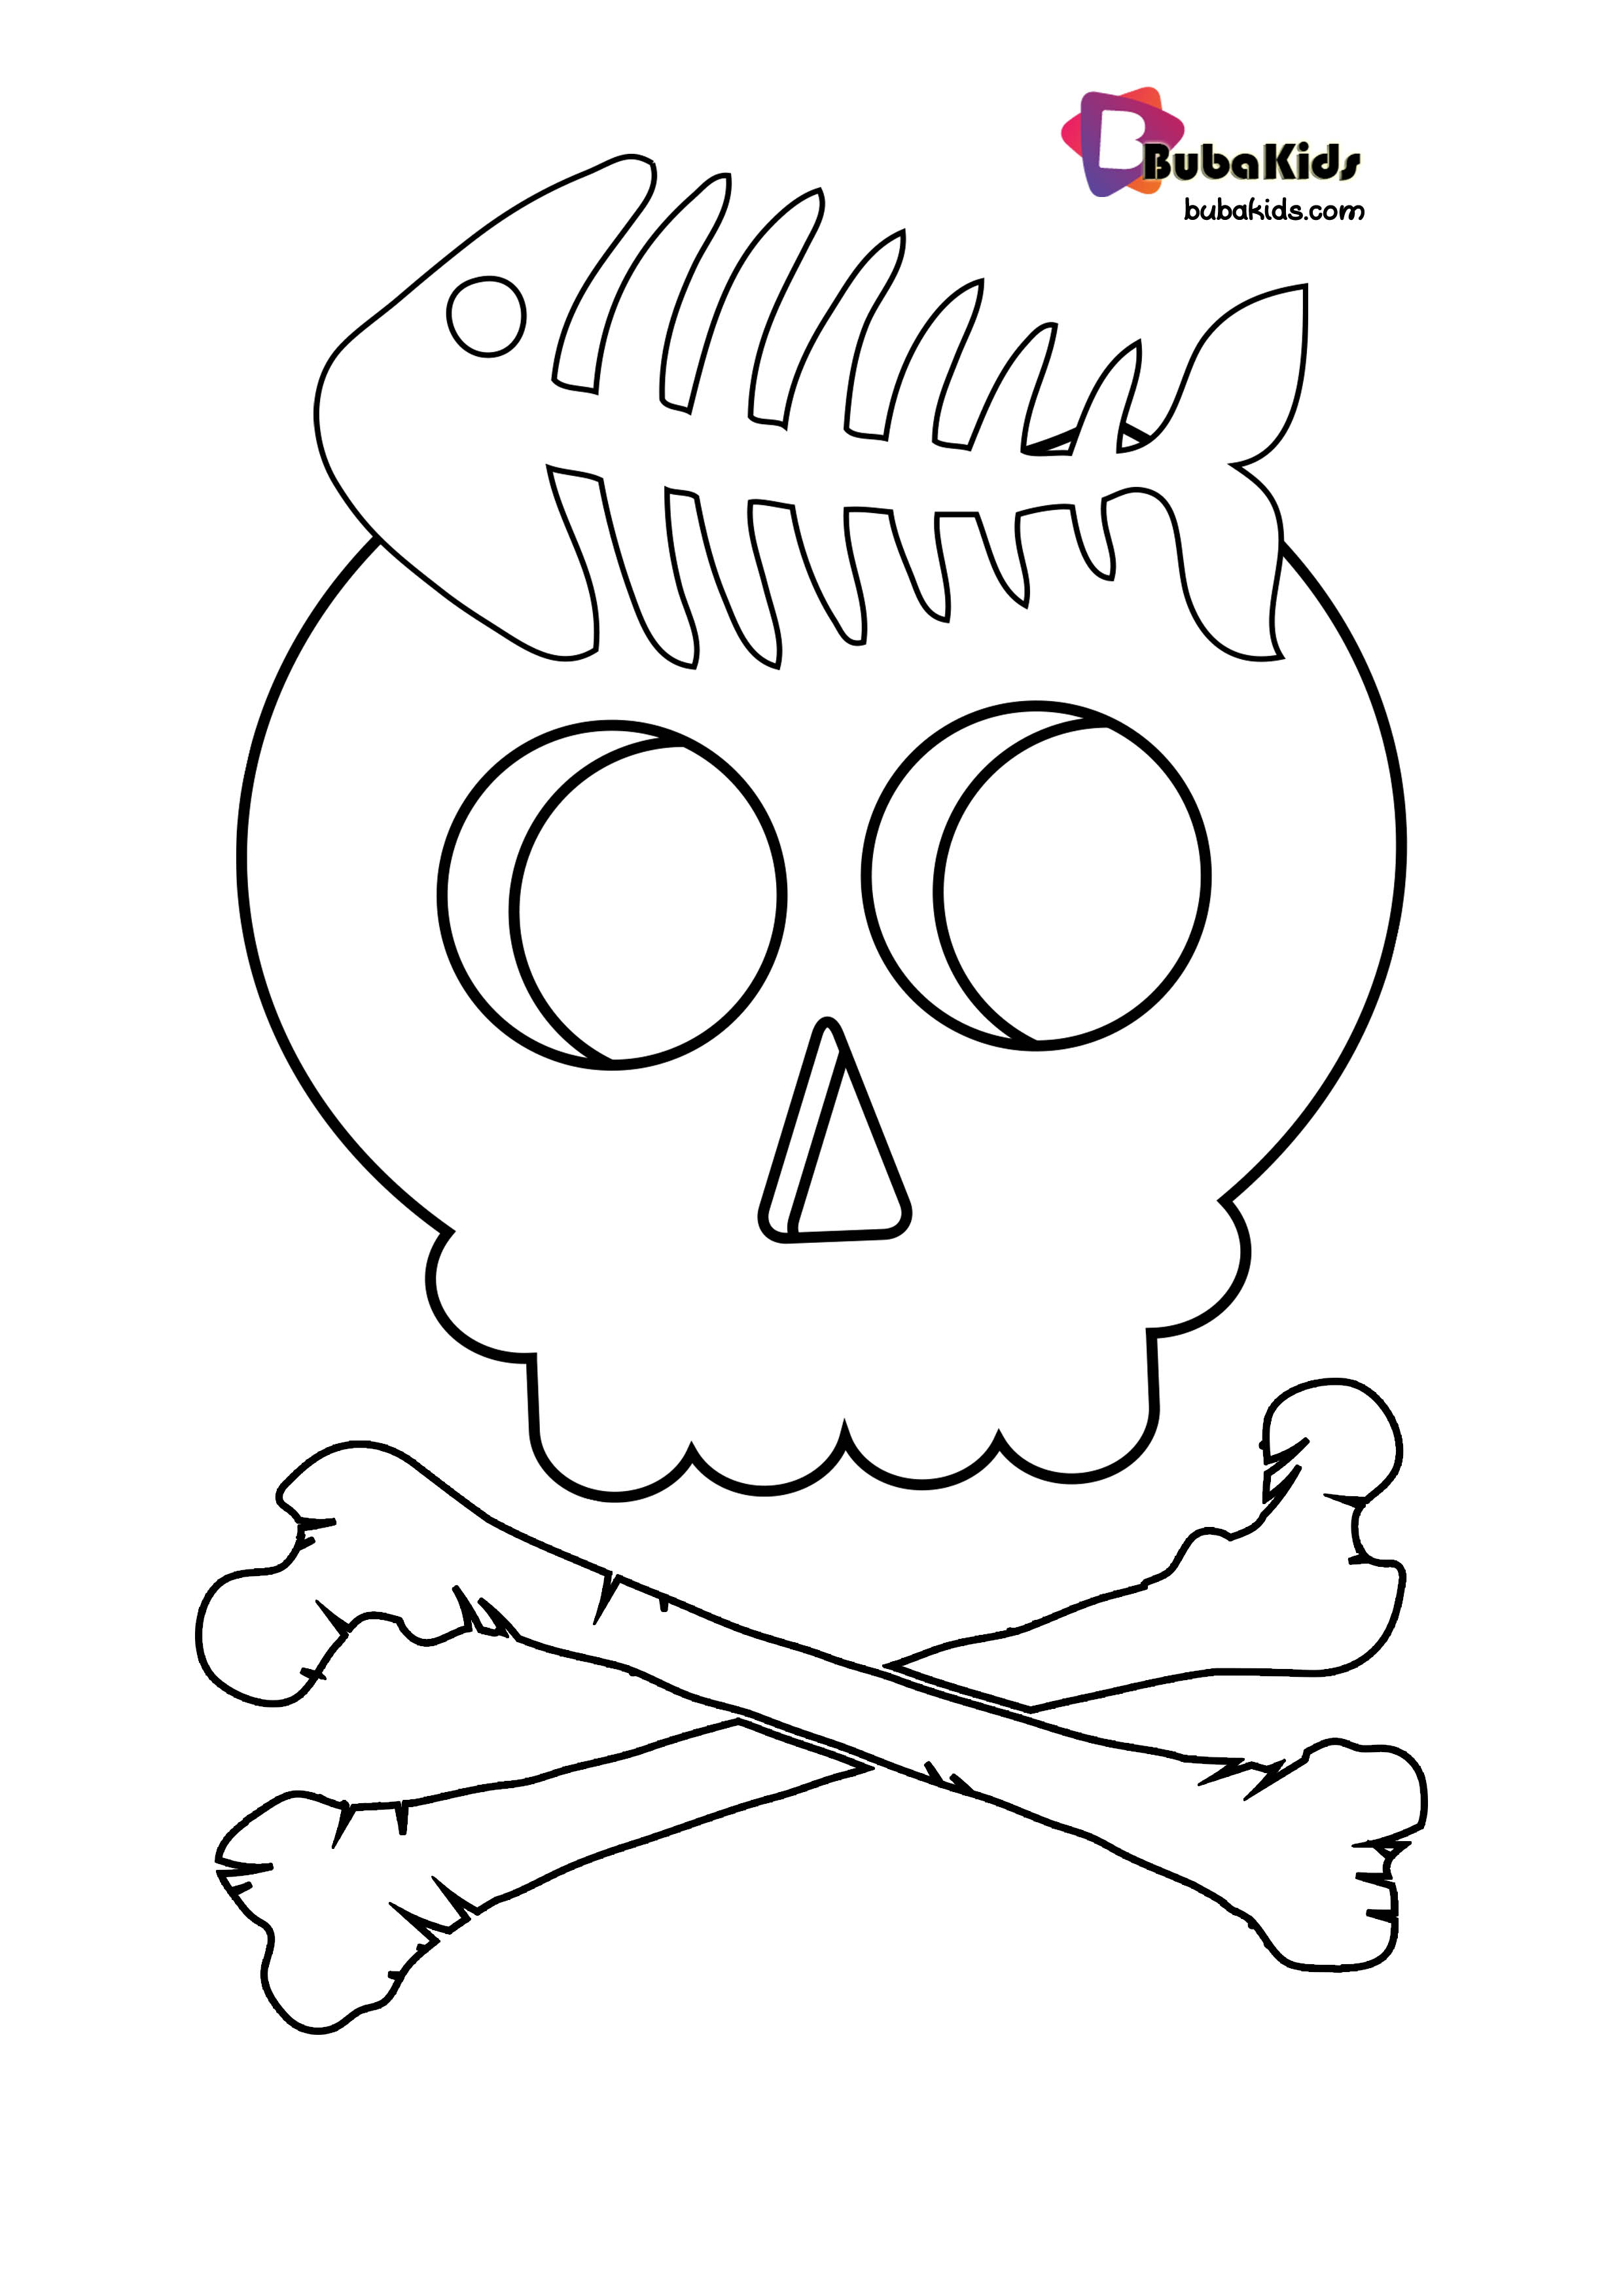 Funny Skull Coloring Page